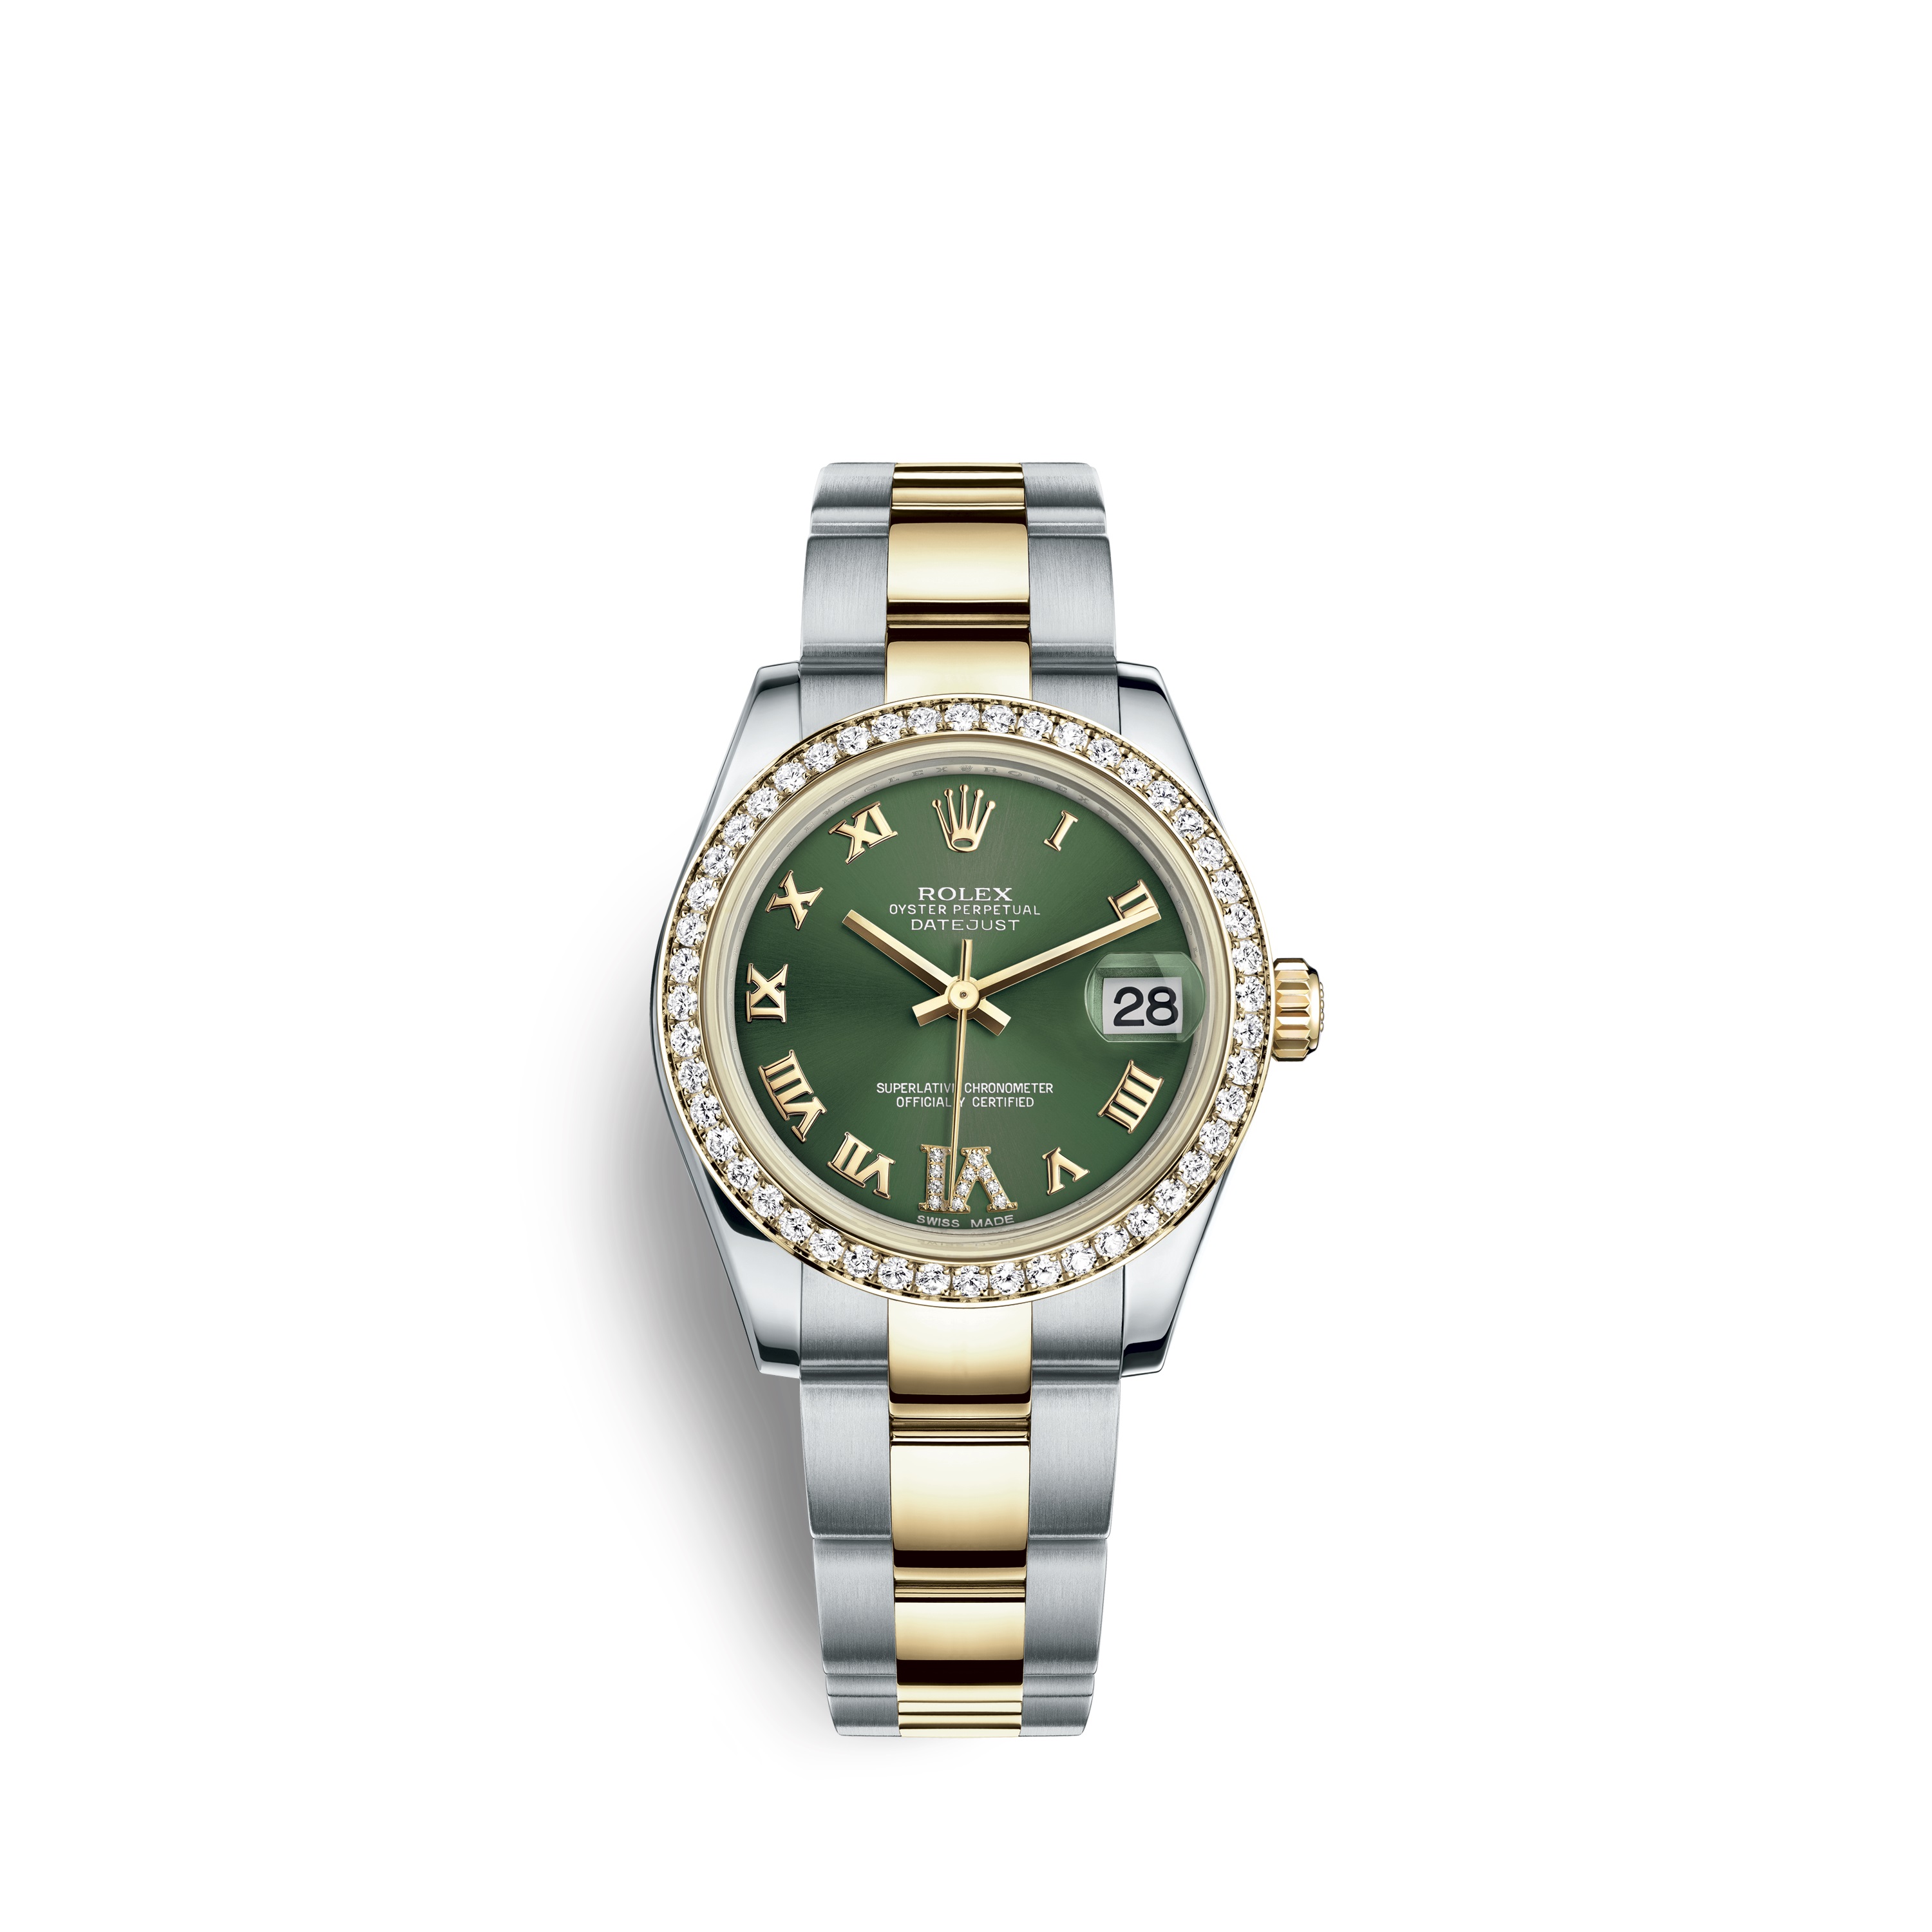 Datejust 31 178383 Gold and Stainless Steel Watch (Olive Green Set with Diamonds)